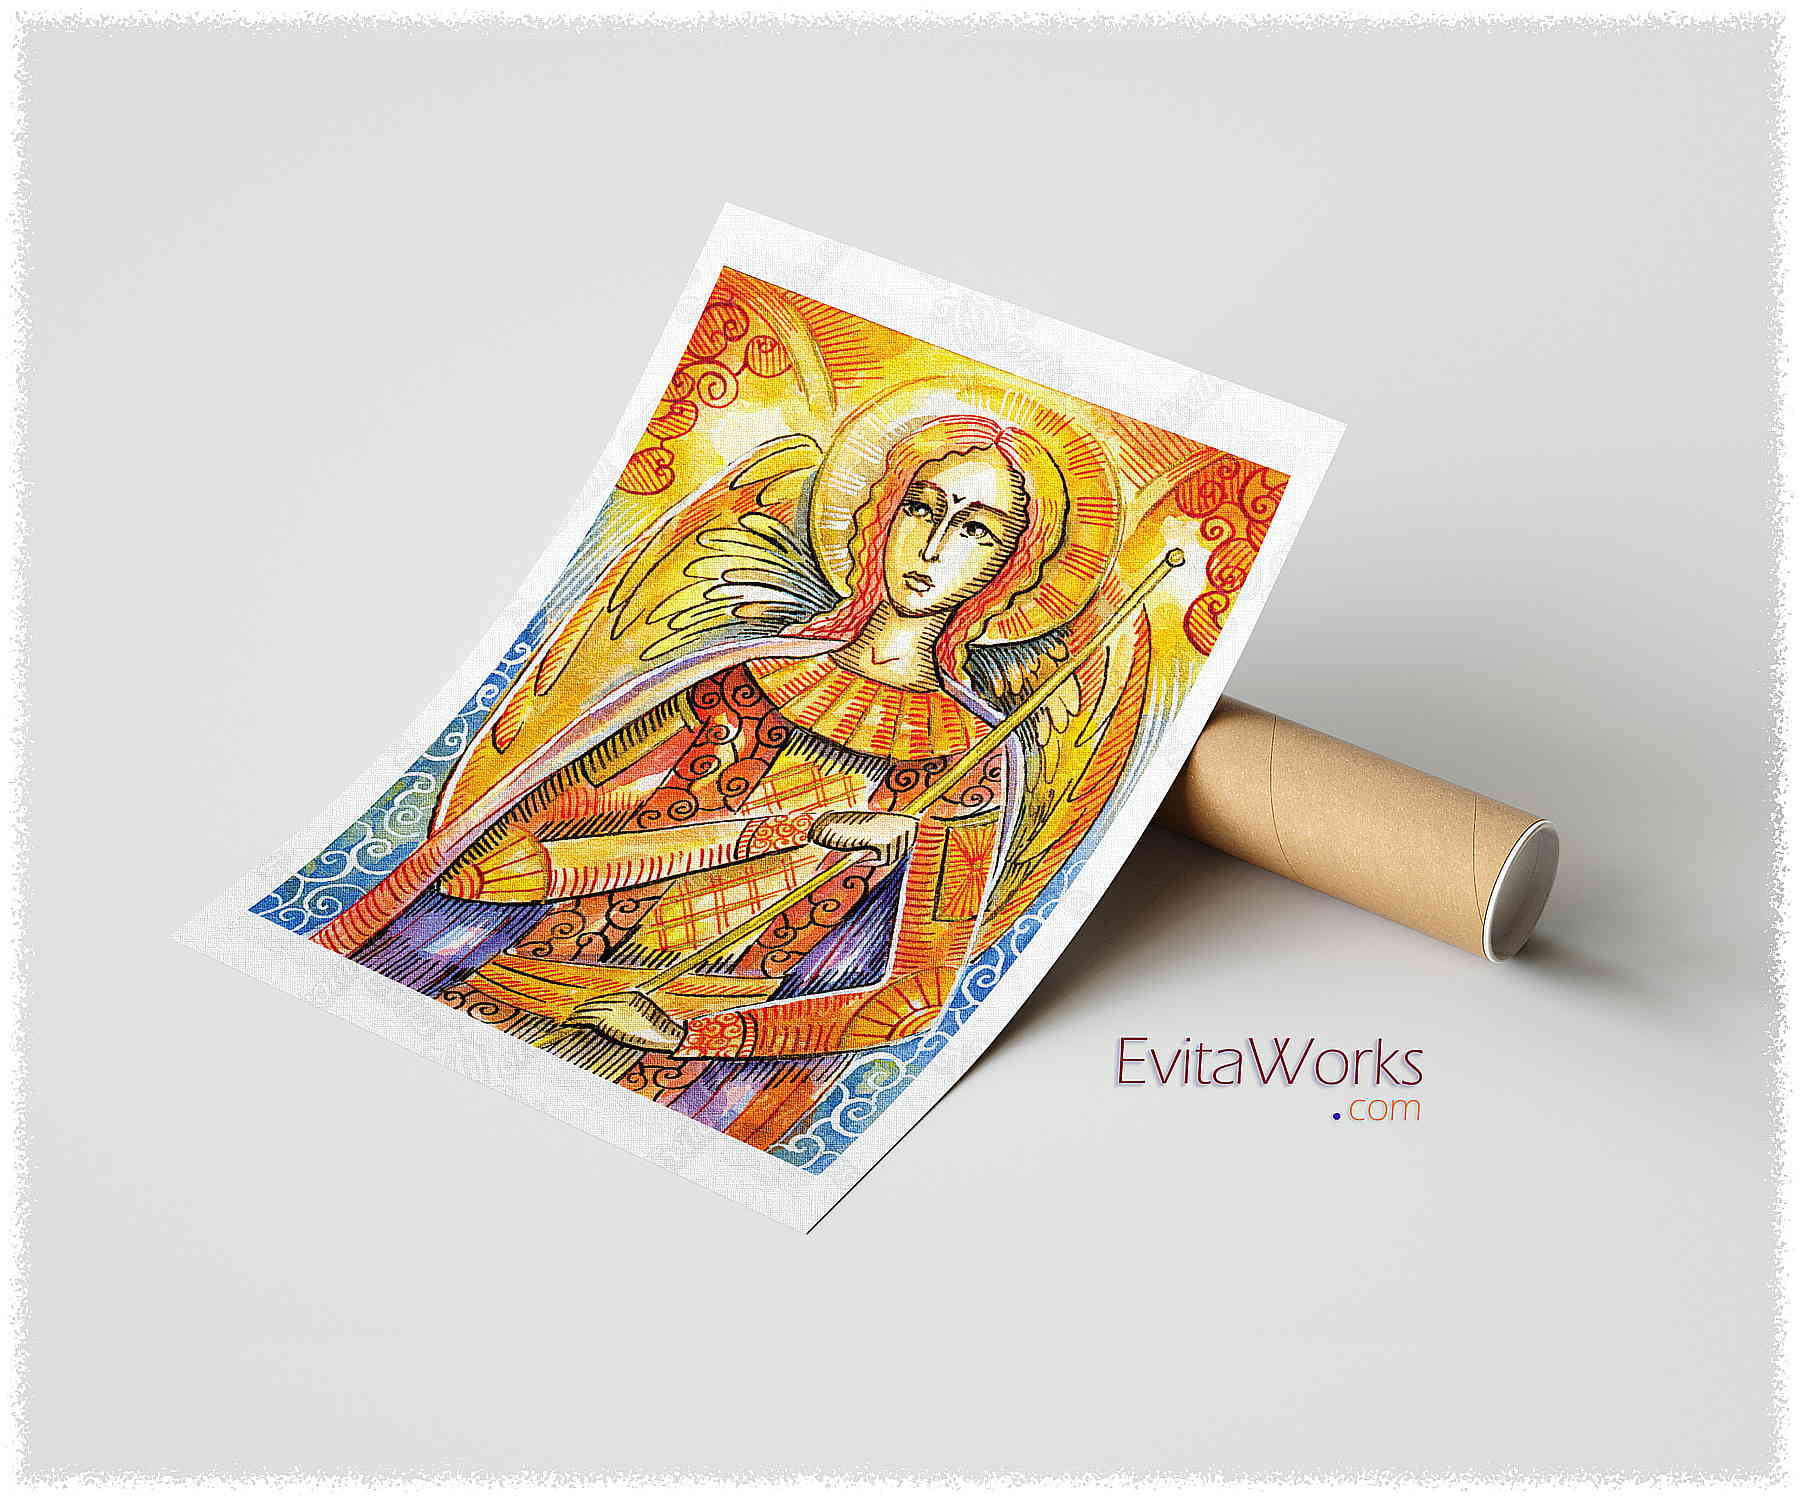 Hit to learn about "Angel 32, Christian art" on prints